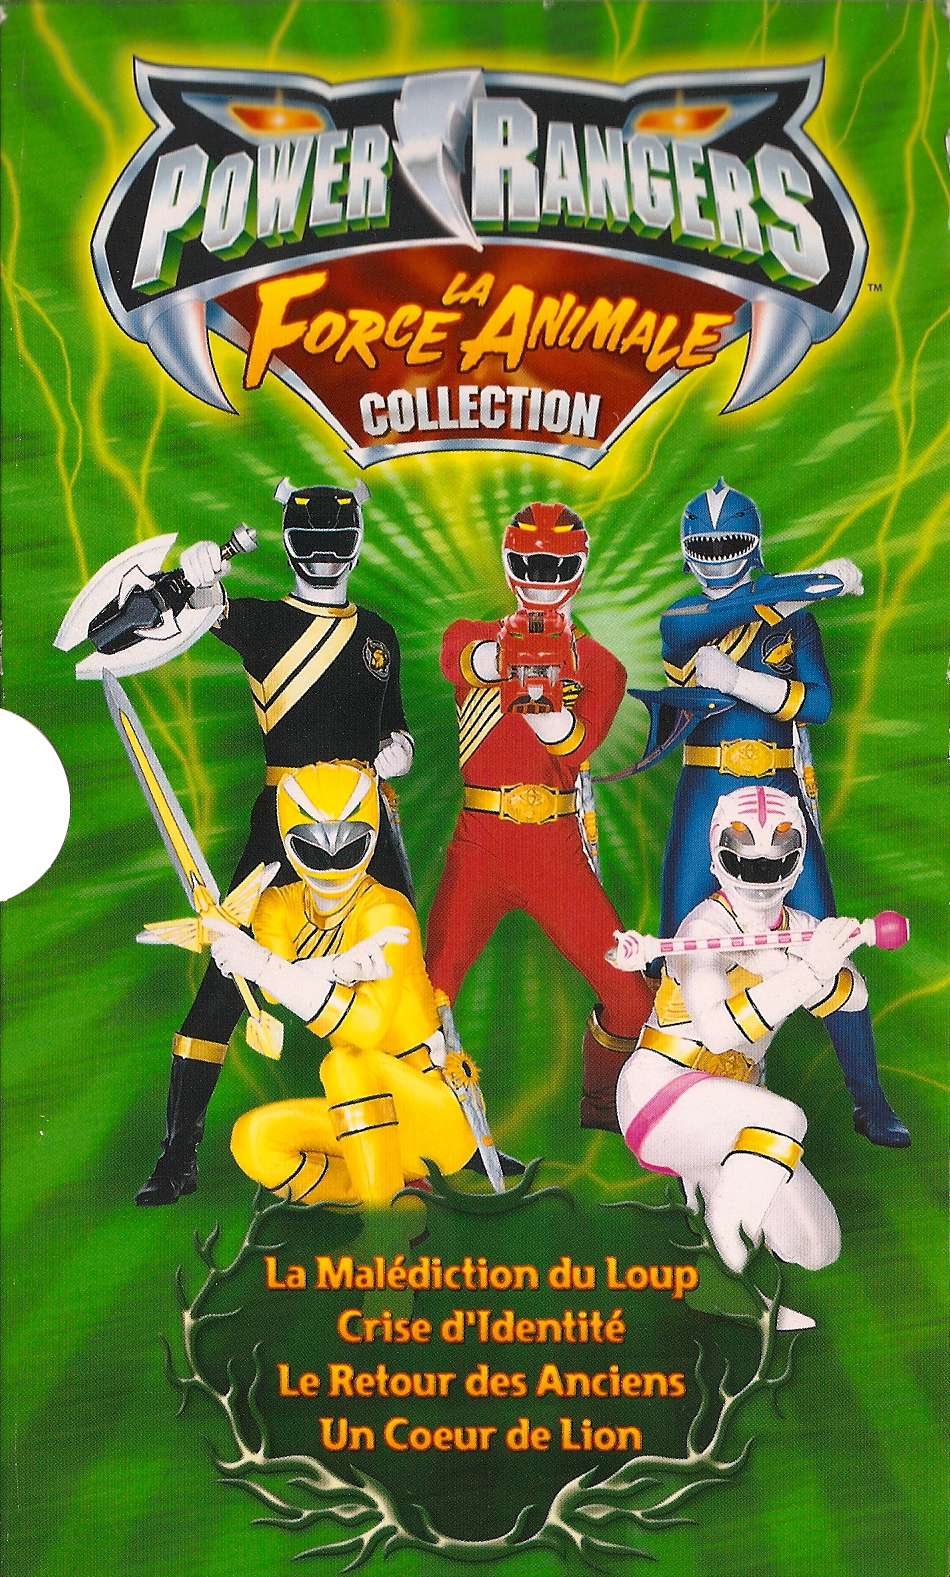 Power Rangers Force Animale Collection